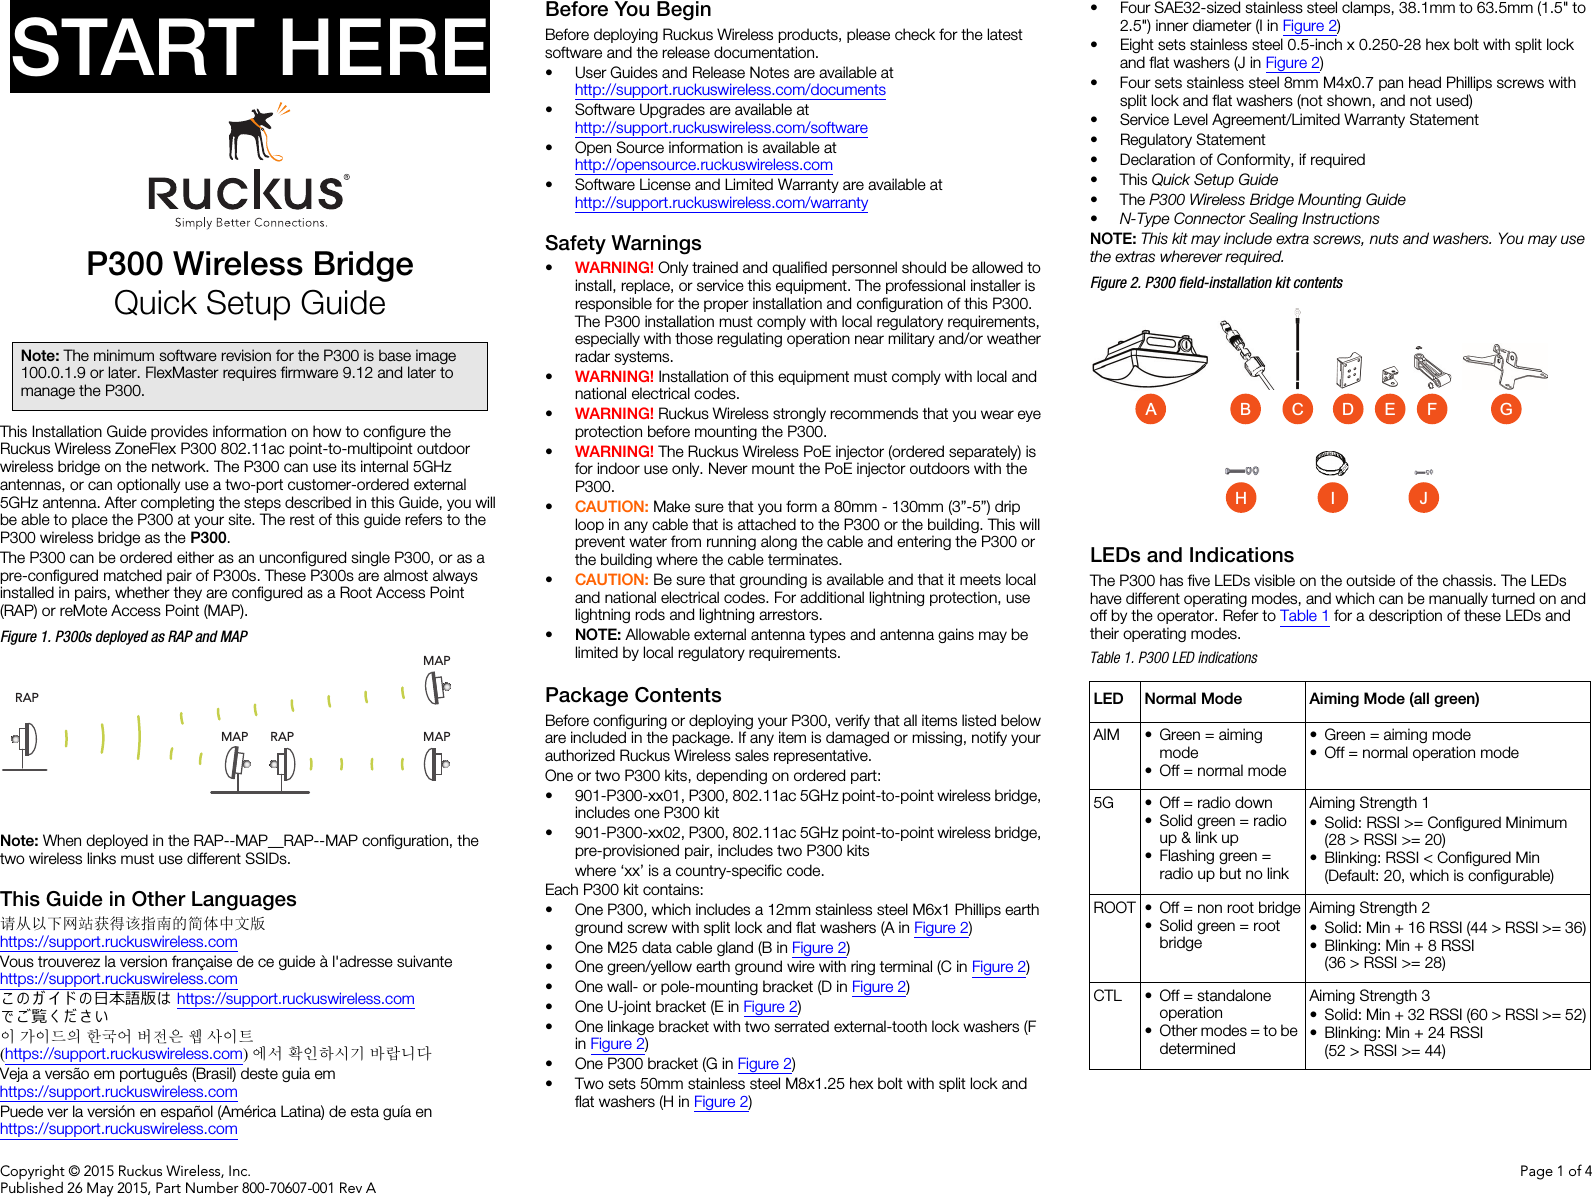 Copyright © 2015 Ruckus Wireless, Inc.Published 26 May 2015, Part Number 800-70607-001 Rev APage 1 of 4START HEREP300 Wireless BridgeQuick Setup GuideThis Installation Guide provides information on how to configure the Ruckus Wireless ZoneFlex P300 802.11ac point-to-multipoint outdoor wireless bridge on the network. The P300 can use its internal 5GHz antennas, or can optionally use a two-port customer-ordered external 5GHz antenna. After completing the steps described in this Guide, you will be able to place the P300 at your site. The rest of this guide refers to the P300 wireless bridge as the P300.The P300 can be ordered either as an unconfigured single P300, or as a pre-configured matched pair of P300s. These P300s are almost always installed in pairs, whether they are configured as a Root Access Point (RAP) or reMote Access Point (MAP).Figure 1. P300s deployed as RAP and MAPNote: When deployed in the RAP--MAP__RAP--MAP configuration, the two wireless links must use different SSIDs.This Guide in Other Languages请从以下网站获得该指南的简体中文版 https://support.ruckuswireless.comVous trouverez la version française de ce guide à l&apos;adresse suivante https://support.ruckuswireless.comこ の ガ イ ド の日本語版は https://support.ruckuswireless.com でご覧く ださい이 가이드의 한국어 버전은 웹 사이트(https://support.ruckuswireless.com)에서 확인하시기 바랍니다Veja a versão em português (Brasil) deste guia em https://support.ruckuswireless.comPuede ver la versión en español (América Latina) de esta guía en https://support.ruckuswireless.comBefore You BeginBefore deploying Ruckus Wireless products, please check for the latest software and the release documentation.• User Guides and Release Notes are available at http://support.ruckuswireless.com/documents• Software Upgrades are available athttp://support.ruckuswireless.com/software• Open Source information is available athttp://opensource.ruckuswireless.com• Software License and Limited Warranty are available at http://support.ruckuswireless.com/warrantySafety Warnings•WARNING! Only trained and qualified personnel should be allowed to install, replace, or service this equipment. The professional installer is responsible for the proper installation and configuration of this P300. The P300 installation must comply with local regulatory requirements, especially with those regulating operation near military and/or weather radar systems. •WARNING! Installation of this equipment must comply with local and national electrical codes. •WARNING! Ruckus Wireless strongly recommends that you wear eye protection before mounting the P300.•WARNING! The Ruckus Wireless PoE injector (ordered separately) is for indoor use only. Never mount the PoE injector outdoors with the P300.•CAUTION: Make sure that you form a 80mm - 130mm (3”-5”) drip loop in any cable that is attached to the P300 or the building. This will prevent water from running along the cable and entering the P300 or the building where the cable terminates. •CAUTION: Be sure that grounding is available and that it meets local and national electrical codes. For additional lightning protection, use lightning rods and lightning arrestors. •NOTE: Allowable external antenna types and antenna gains may be limited by local regulatory requirements.Package ContentsBefore configuring or deploying your P300, verify that all items listed below are included in the package. If any item is damaged or missing, notify your authorized Ruckus Wireless sales representative. One or two P300 kits, depending on ordered part: • 901-P300-xx01, P300, 802.11ac 5GHz point-to-point wireless bridge, includes one P300 kit• 901-P300-xx02, P300, 802.11ac 5GHz point-to-point wireless bridge, pre-provisioned pair, includes two P300 kitswhere ‘xx’ is a country-specific code.Each P300 kit contains:• One P300, which includes a 12mm stainless steel M6x1 Phillips earth ground screw with split lock and flat washers (A in Figure 2)• One M25 data cable gland (B in Figure 2)• One green/yellow earth ground wire with ring terminal (C in Figure 2)• One wall- or pole-mounting bracket (D in Figure 2)• One U-joint bracket (E in Figure 2)• One linkage bracket with two serrated external-tooth lock washers (F in Figure 2)• One P300 bracket (G in Figure 2)• Two sets 50mm stainless steel M8x1.25 hex bolt with split lock and flat washers (H in Figure 2)• Four SAE32-sized stainless steel clamps, 38.1mm to 63.5mm (1.5&quot; to 2.5&quot;) inner diameter (I in Figure 2)• Eight sets stainless steel 0.5-inch x 0.250-28 hex bolt with split lock and flat washers (J in Figure 2)• Four sets stainless steel 8mm M4x0.7 pan head Phillips screws with split lock and flat washers (not shown, and not used)• Service Level Agreement/Limited Warranty Statement• Regulatory Statement• Declaration of Conformity, if required• This Quick Setup Guide•The P300 Wireless Bridge Mounting Guide•N-Type Connector Sealing Instructions NOTE: This kit may include extra screws, nuts and washers. You may use the extras wherever required.Figure 2. P300 field-installation kit contentsLEDs and IndicationsThe P300 has five LEDs visible on the outside of the chassis. The LEDs have different operating modes, and which can be manually turned on and off by the operator. Refer to Table 1 for a description of these LEDs and their operating modes.Note: The minimum software revision for the P300 is base image 100.0.1.9 or later. FlexMaster requires firmware 9.12 and later to manage the P300.MAPMAPRAPRAP MAPTable 1. P300 LED indicationsLED Normal Mode Aiming Mode (all green)AIM • Green = aiming mode• Off = normal mode• Green = aiming mode• Off = normal operation mode5G • Off = radio down• Solid green = radio up &amp; link up• Flashing green = radio up but no linkAiming Strength 1• Solid: RSSI &gt;= Configured Minimum (28 &gt; RSSI &gt;= 20)• Blinking: RSSI &lt; Configured Min (Default: 20, which is configurable)ROOT • Off = non root bridge• Solid green = root bridgeAiming Strength 2• Solid: Min + 16 RSSI (44 &gt; RSSI &gt;= 36)• Blinking: Min + 8 RSSI (36 &gt; RSSI &gt;= 28)CTL • Off = standalone operation• Other modes = to be determinedAiming Strength 3• Solid: Min + 32 RSSI (60 &gt; RSSI &gt;= 52)• Blinking: Min + 24 RSSI (52 &gt; RSSI &gt;= 44)F GHEA CBDIJ